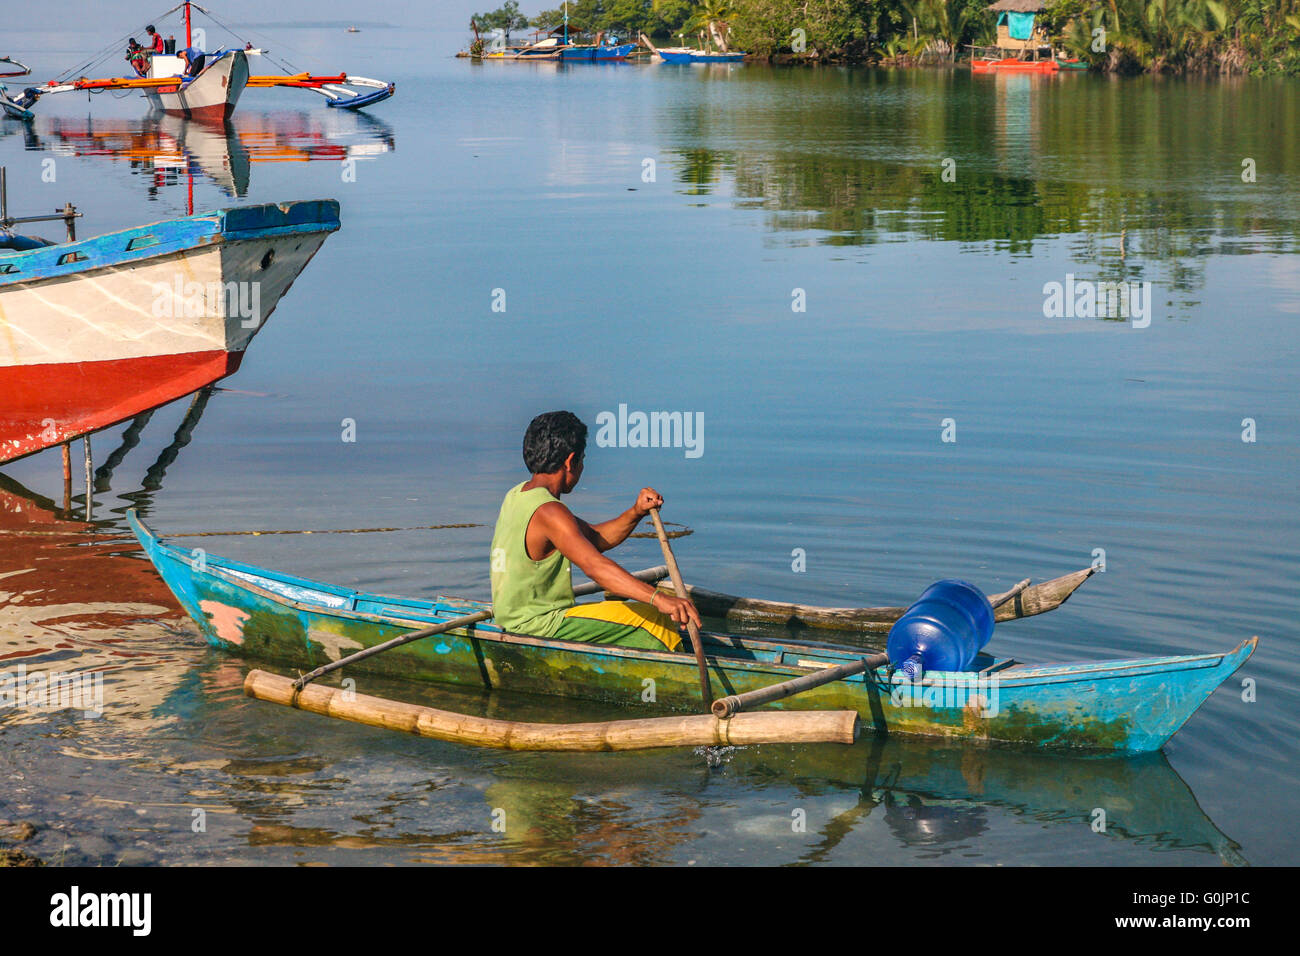 https://c8.alamy.com/comp/G0JP1C/philippines-bohol-fishing-boats-on-the-river-at-loay-adrian-baker-G0JP1C.jpg